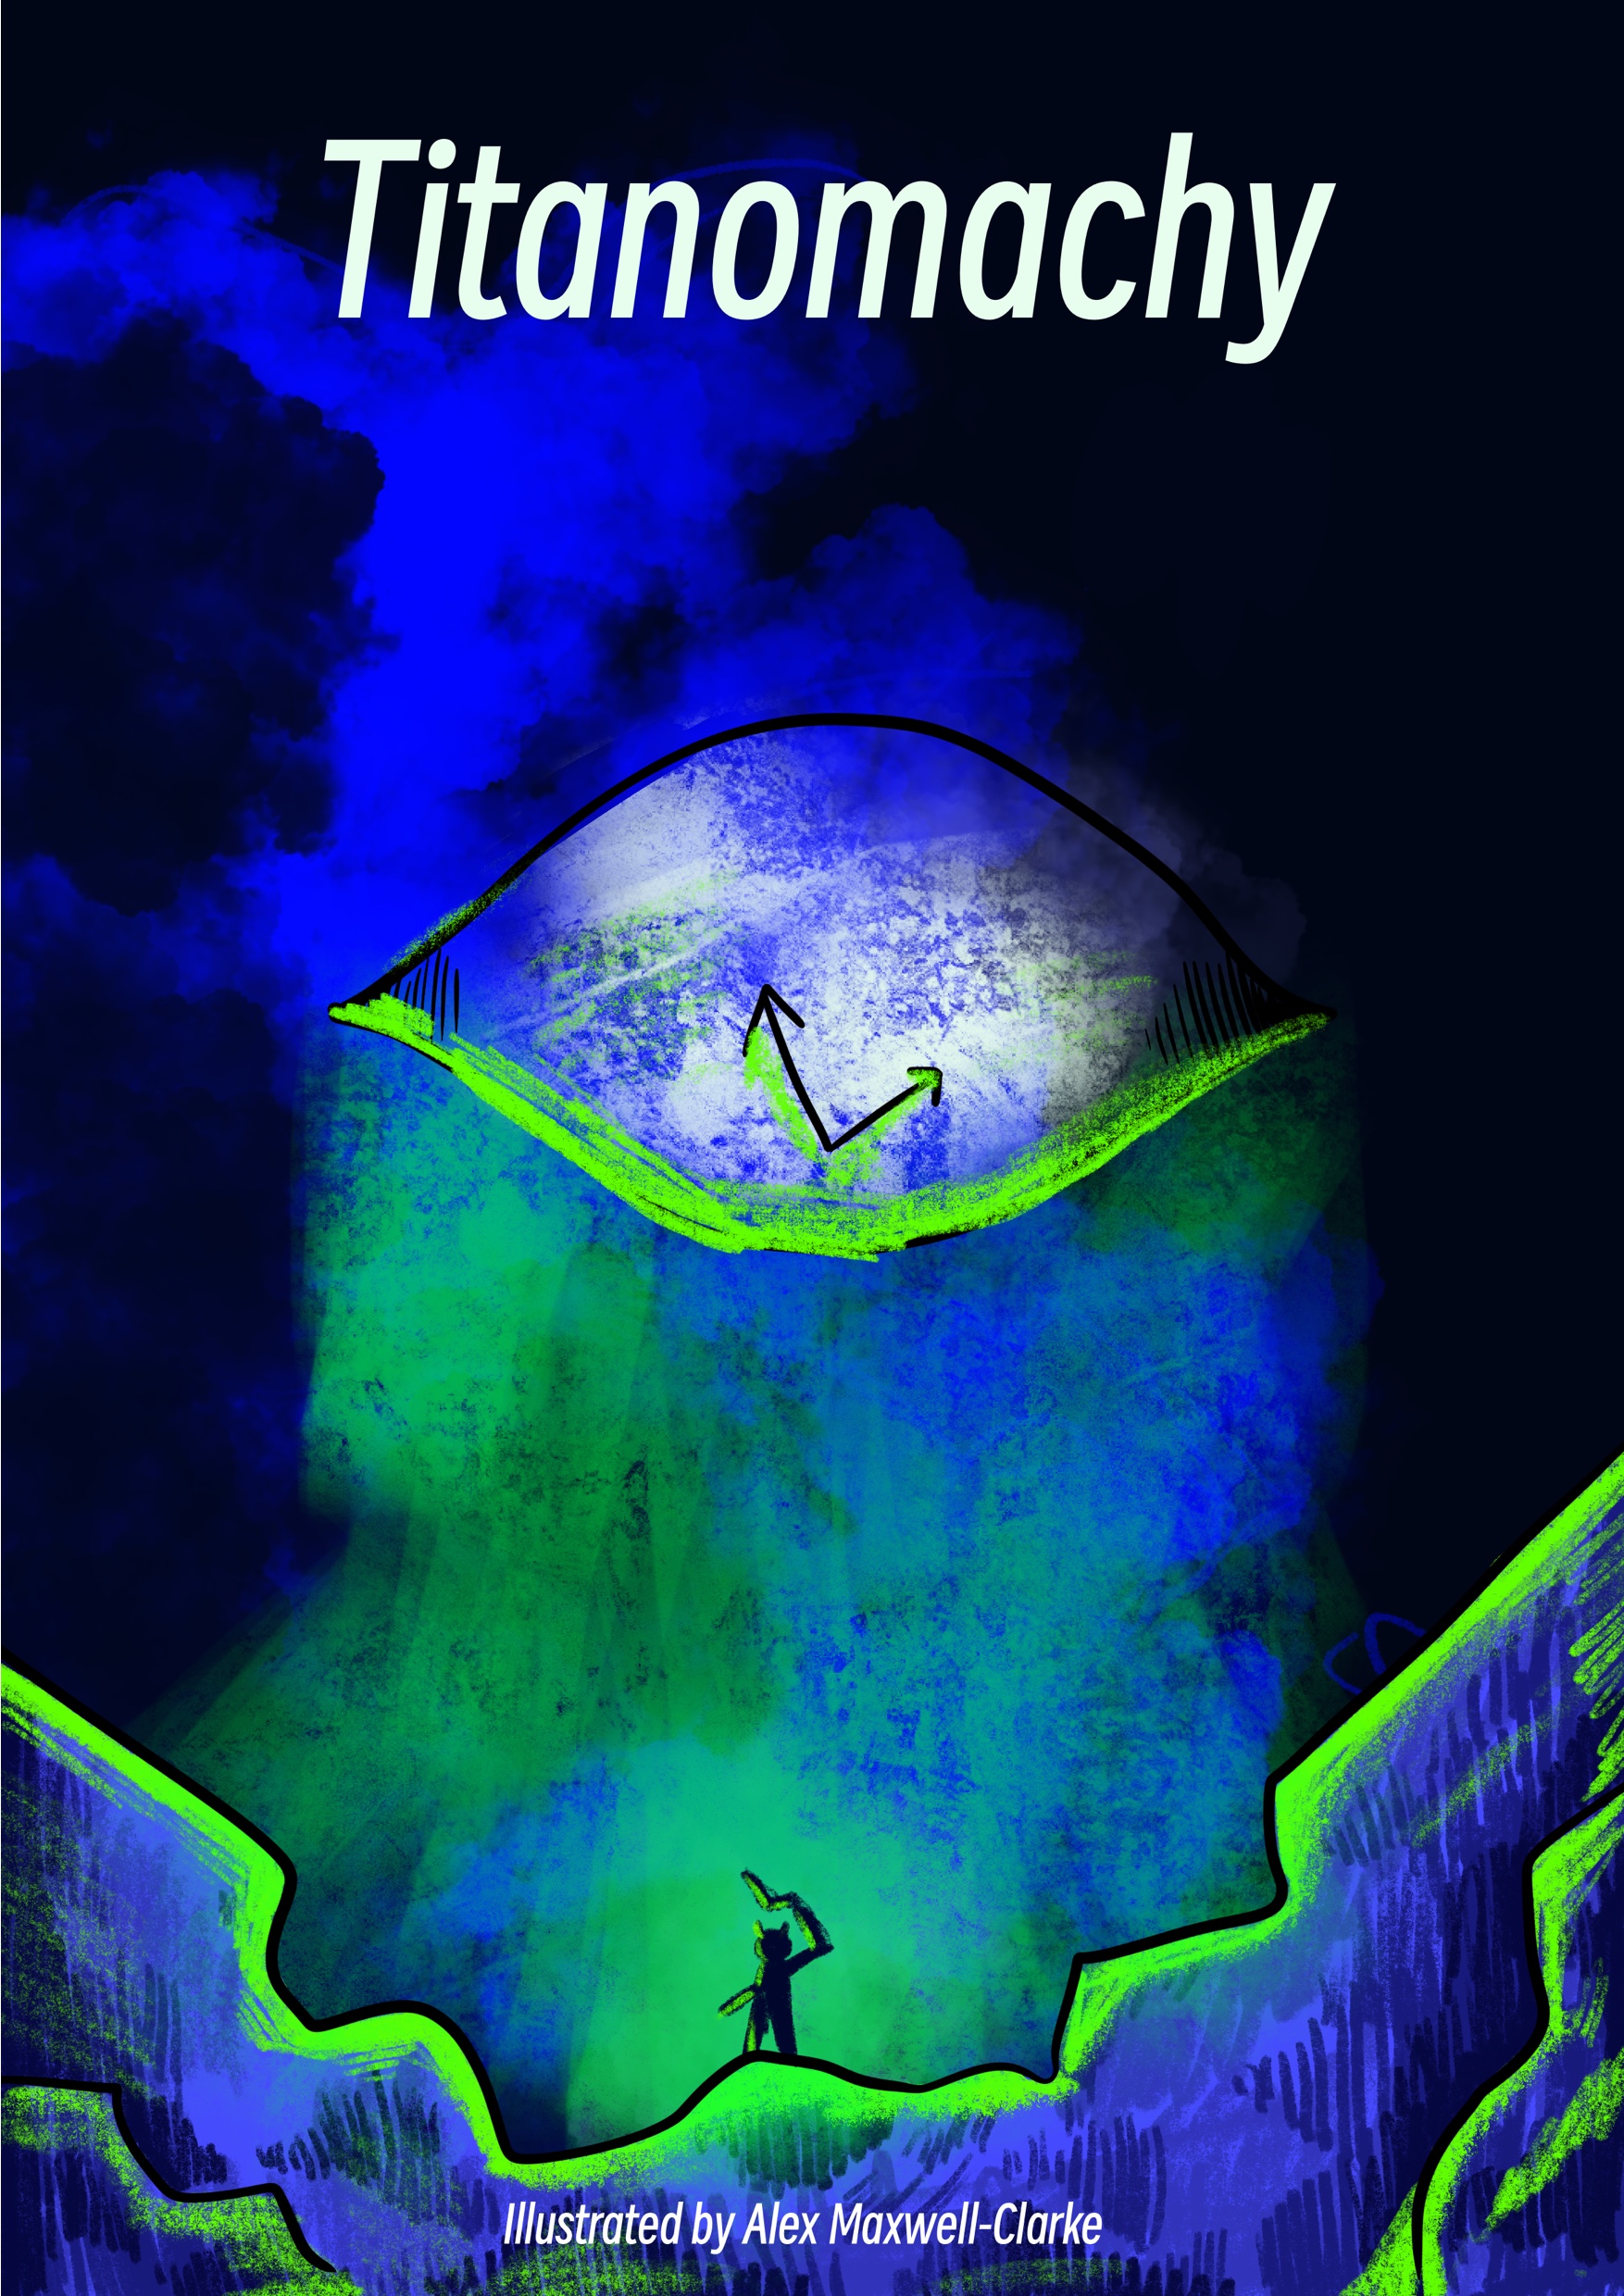 Dark blue background with neon green smoke. Silhouette of character holding scythe on rocks in the foreground, looking at massive eye in the distance. Pale green font reads "Titanomachy" at the top of the page.